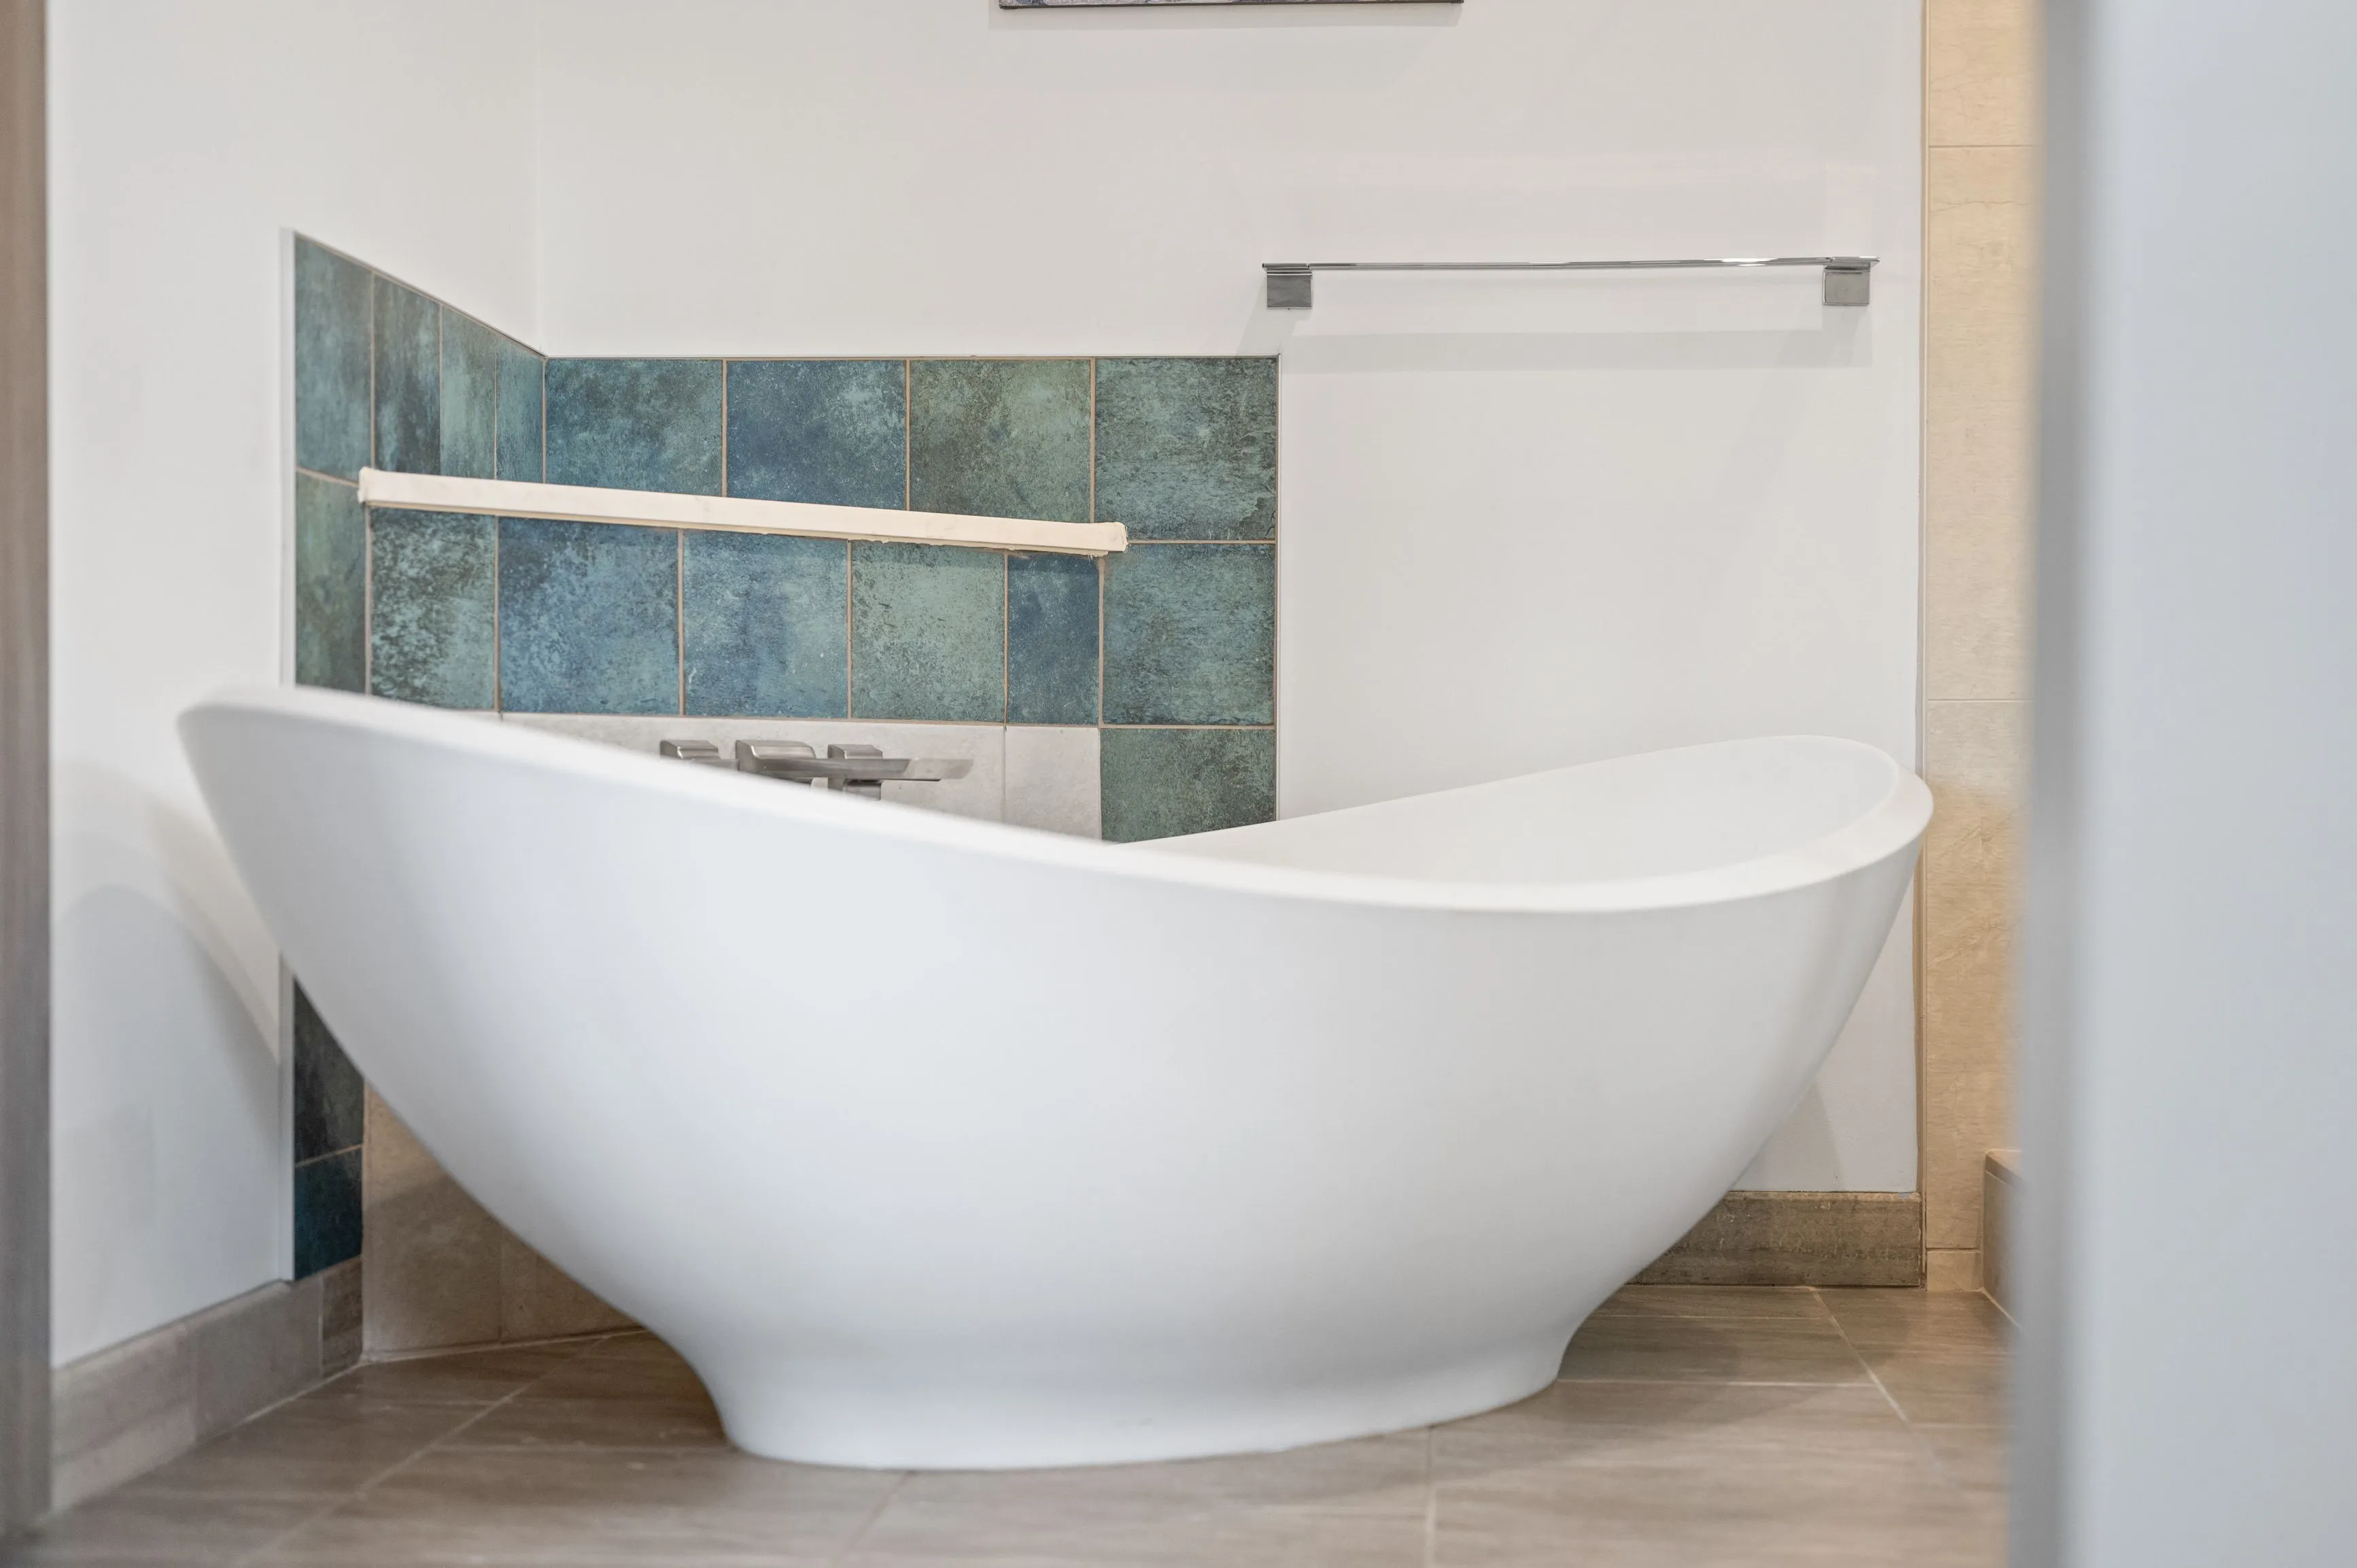 Modern free-standing bathtub in a clean bathroom with blue tile accents and tiled flooring.